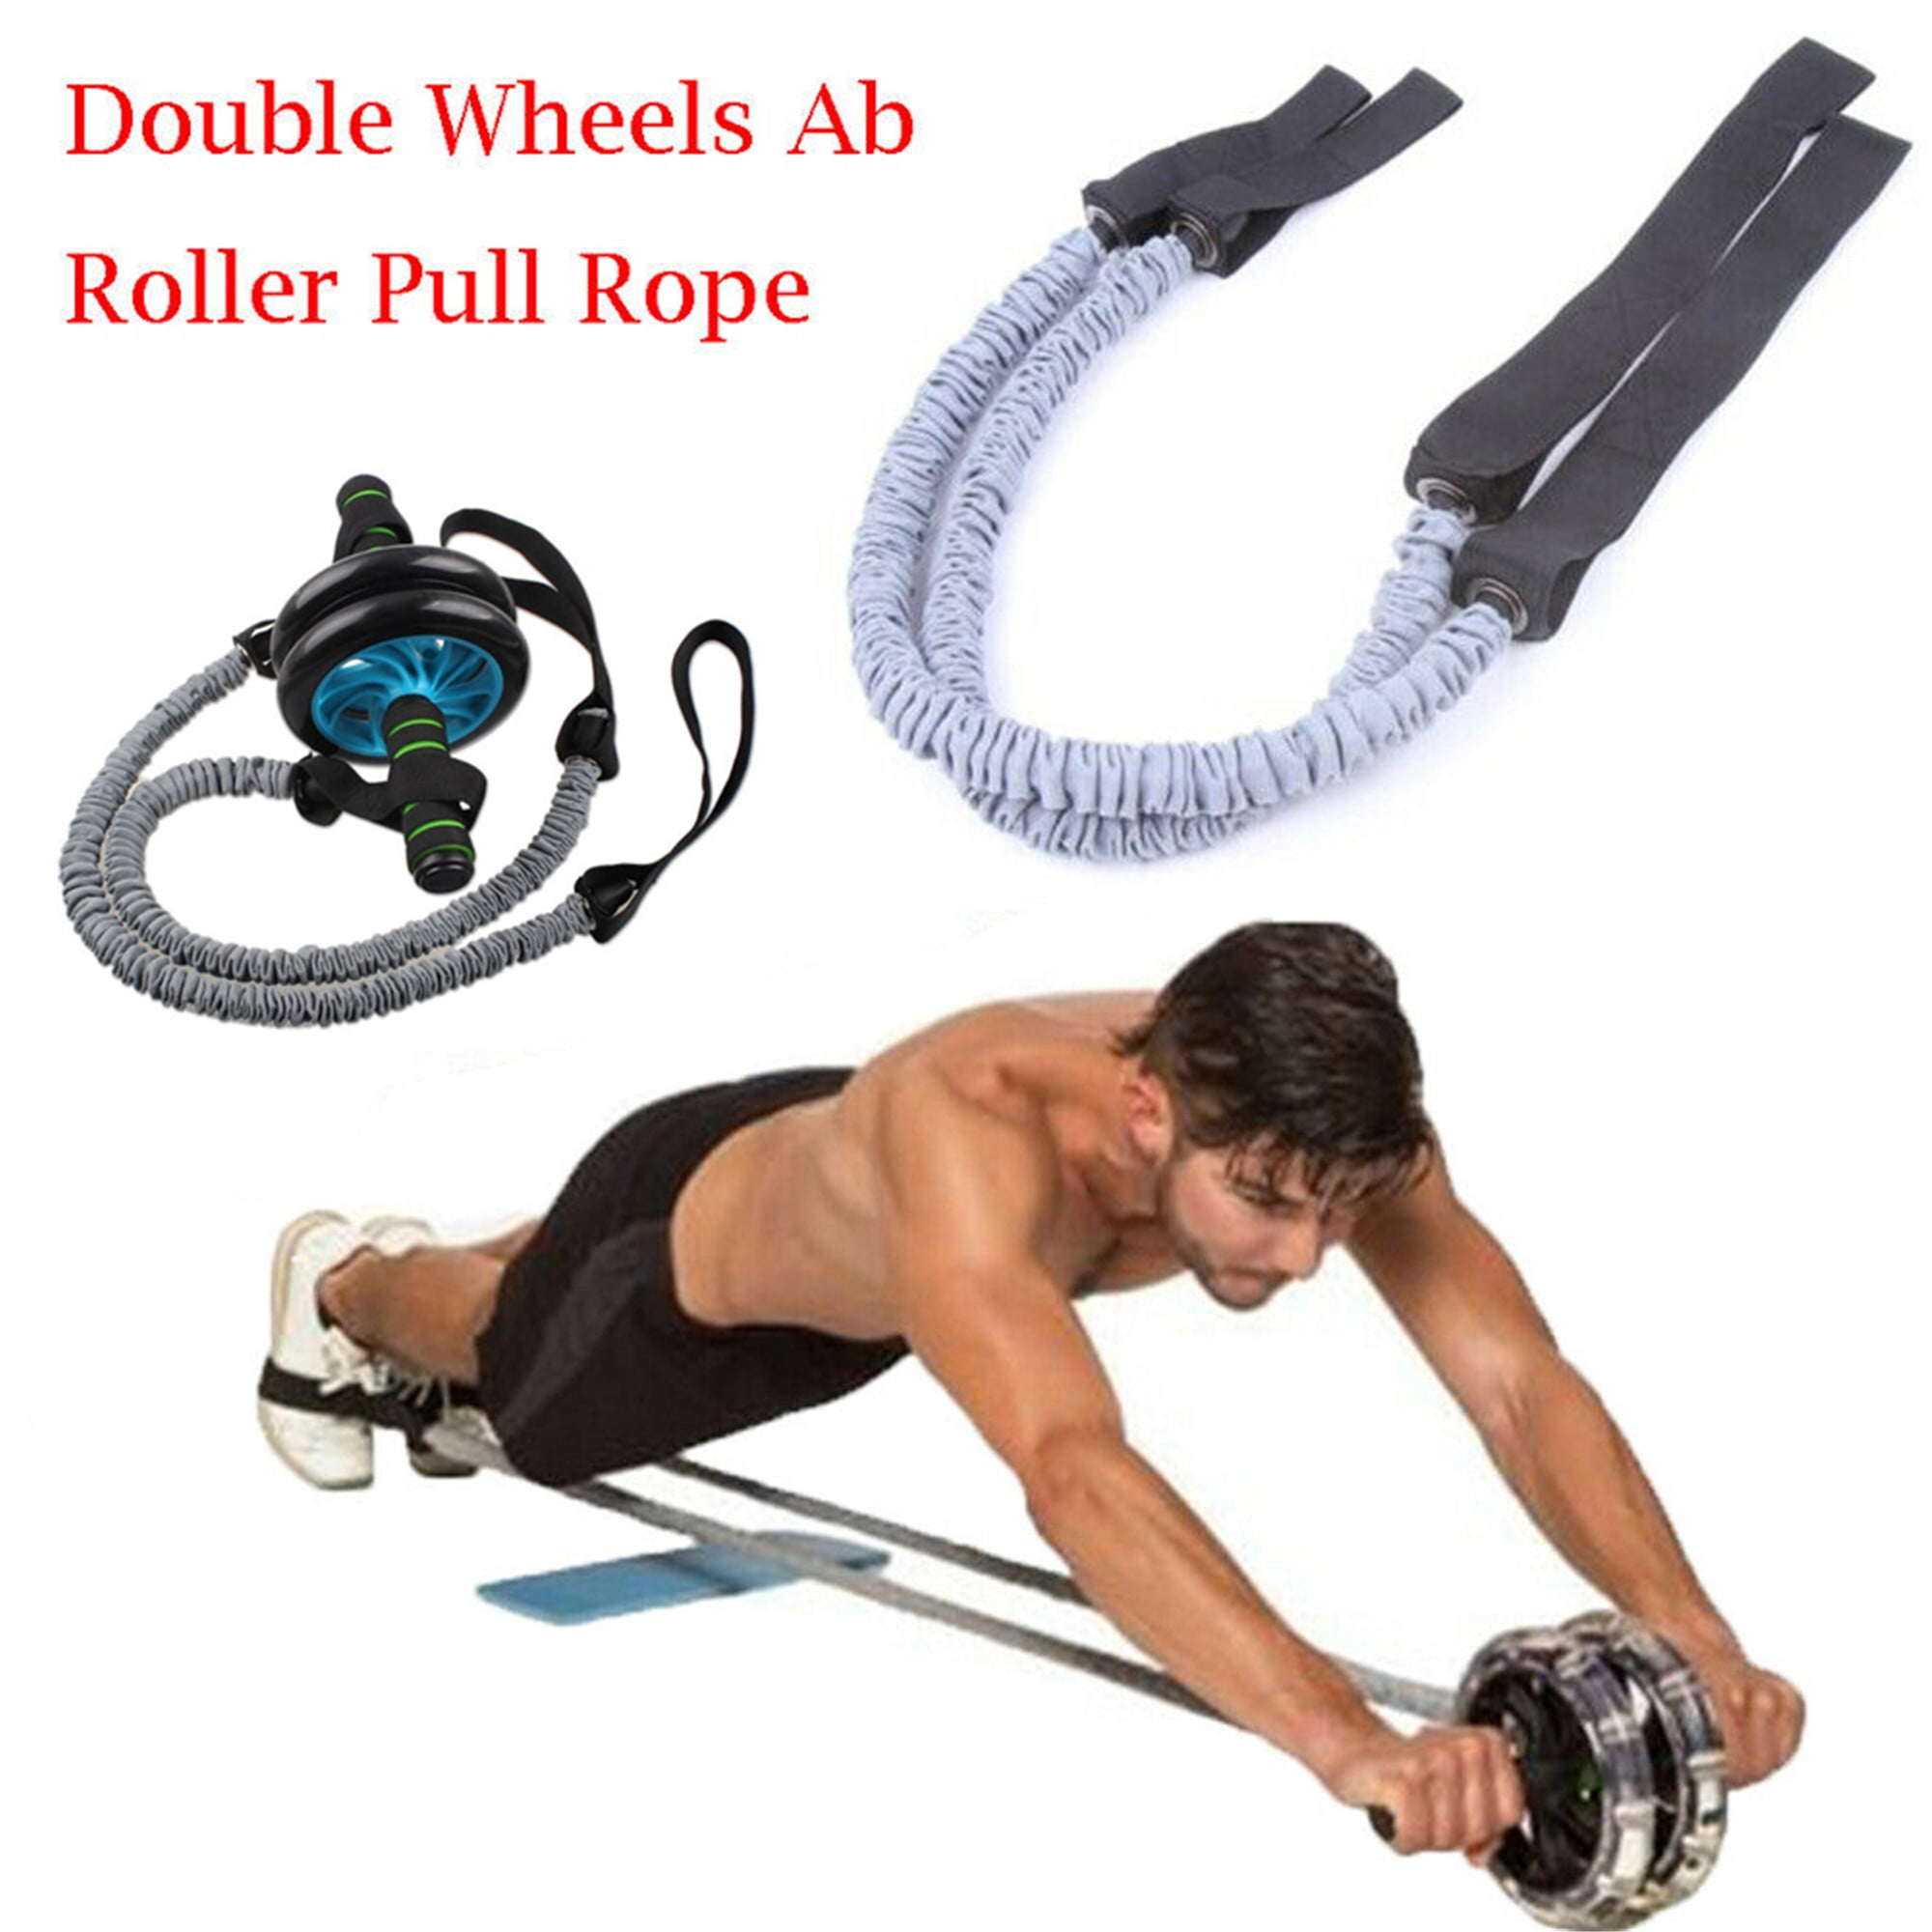 Details about   ABS Trainer Abdominal Exercise Gym Wheel Roller Fitness Training Equipment USA 